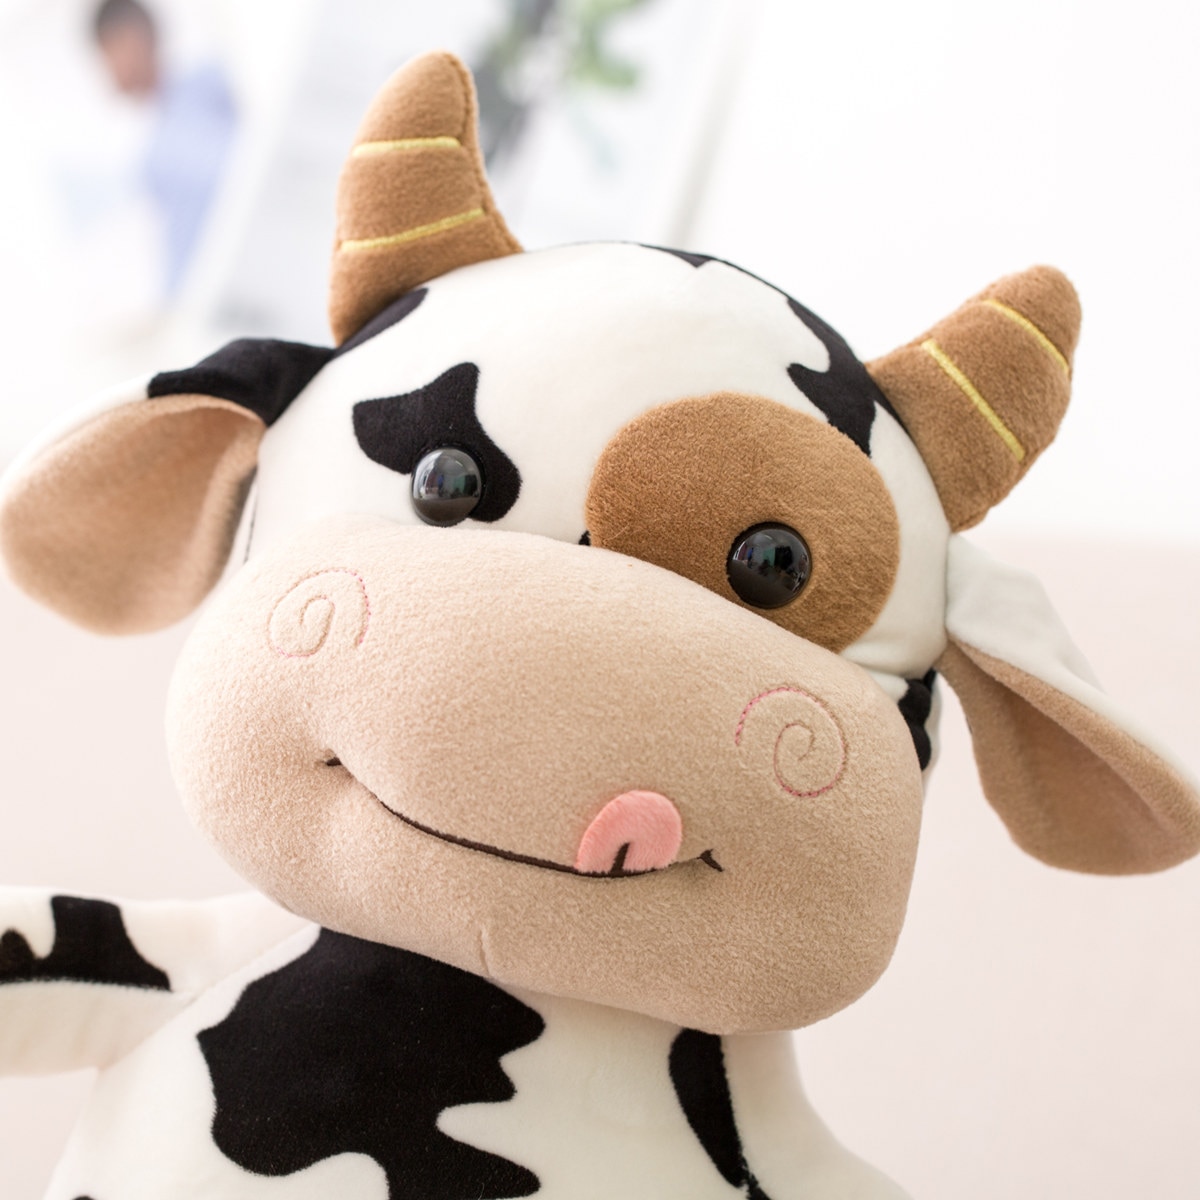 2020 New Plush Cow Toy Cute Cattle Plush Stuffed Animals Cattle Soft Doll Kids Toys Birthday 3 - The Cow Print